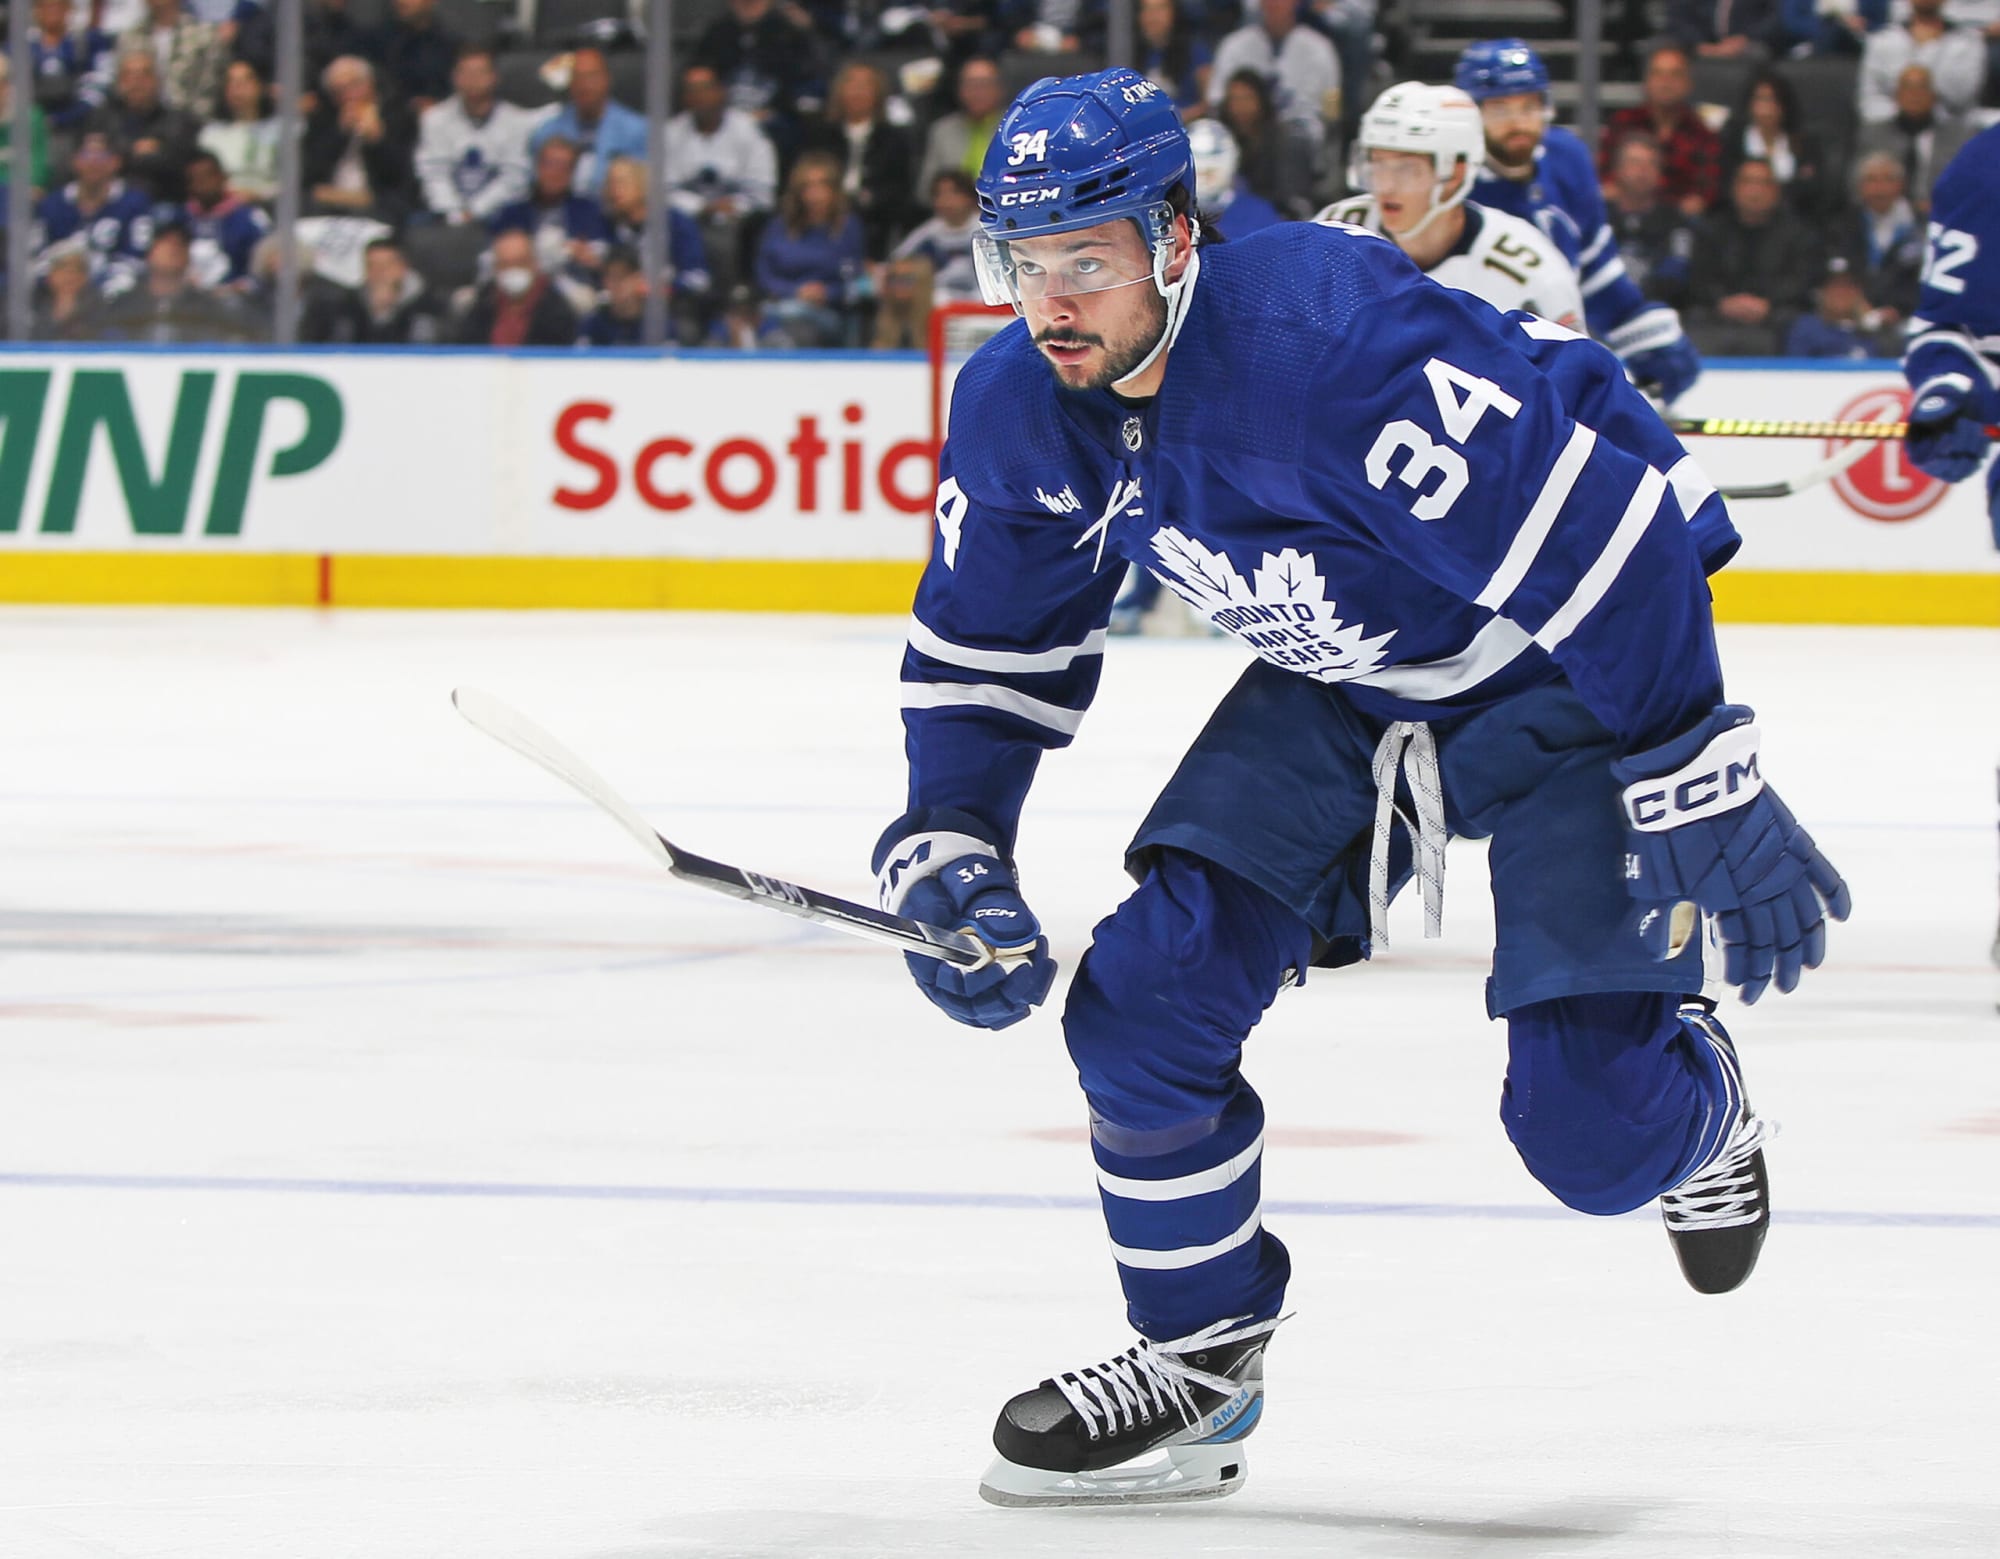 Top 5 Most Valuable Players on the Toronto Maple Leafs This Season